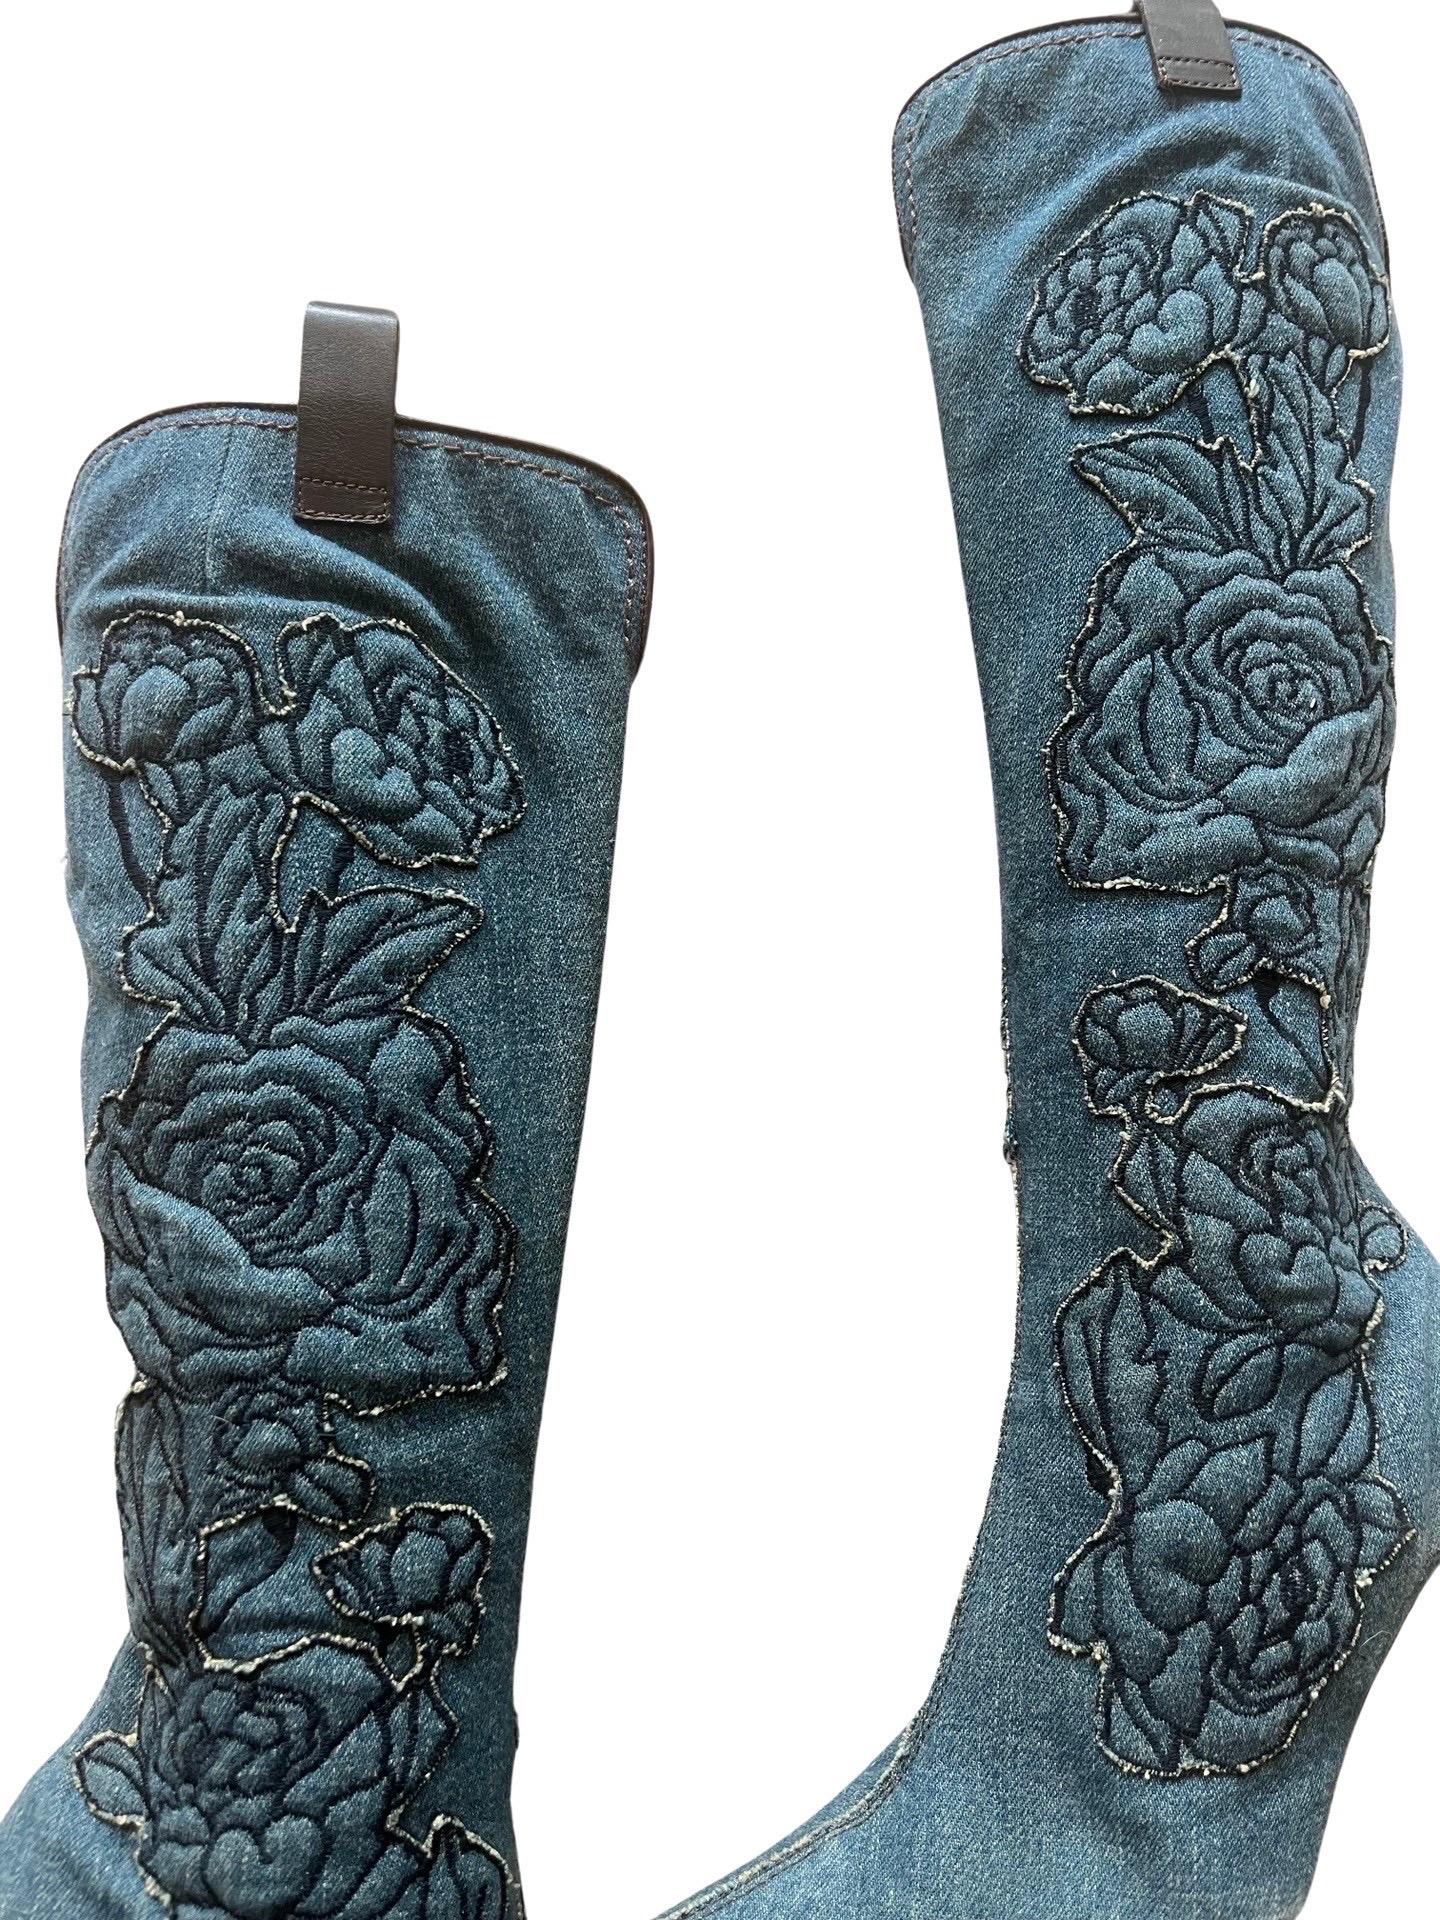 Highly coveted vintage Roberto Cavalli knee high boots in denim with floral denim appliques up the sides. Zip closure and lined in an animal print leather with a leather pull tab on the top sides. Wooden heel of 4